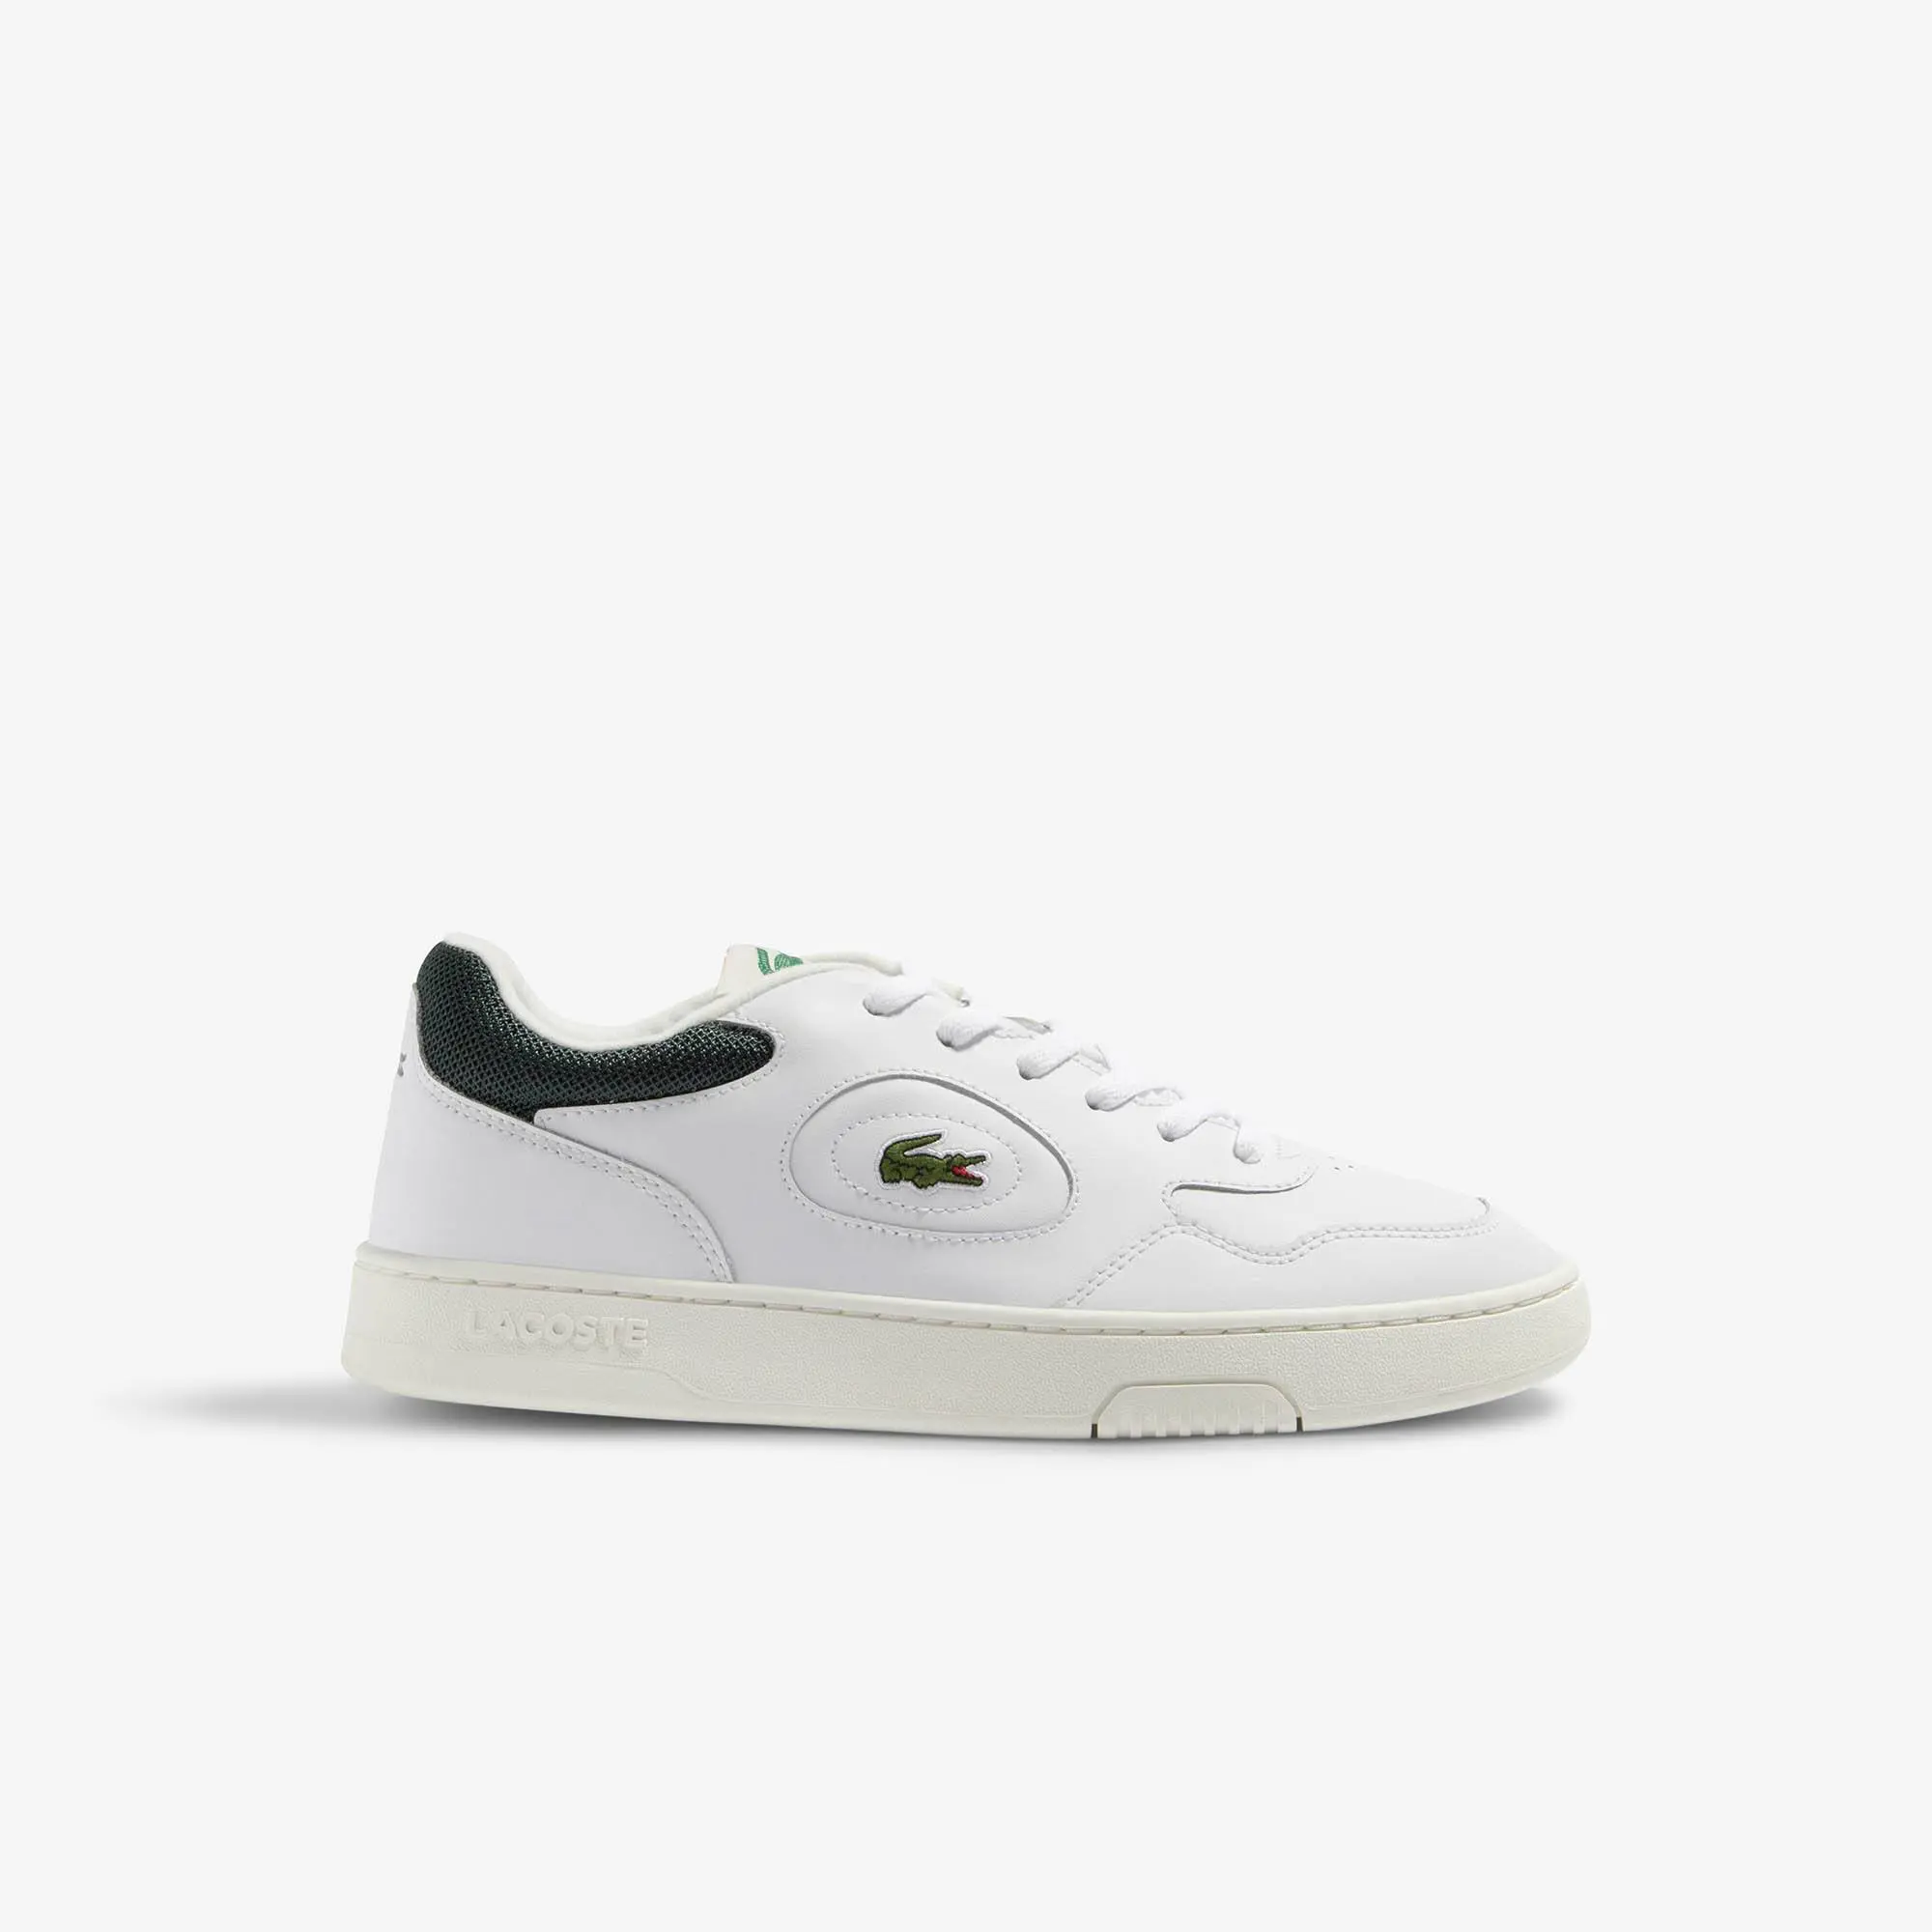 Lacoste Men's Lineset Leather Trainers. 1